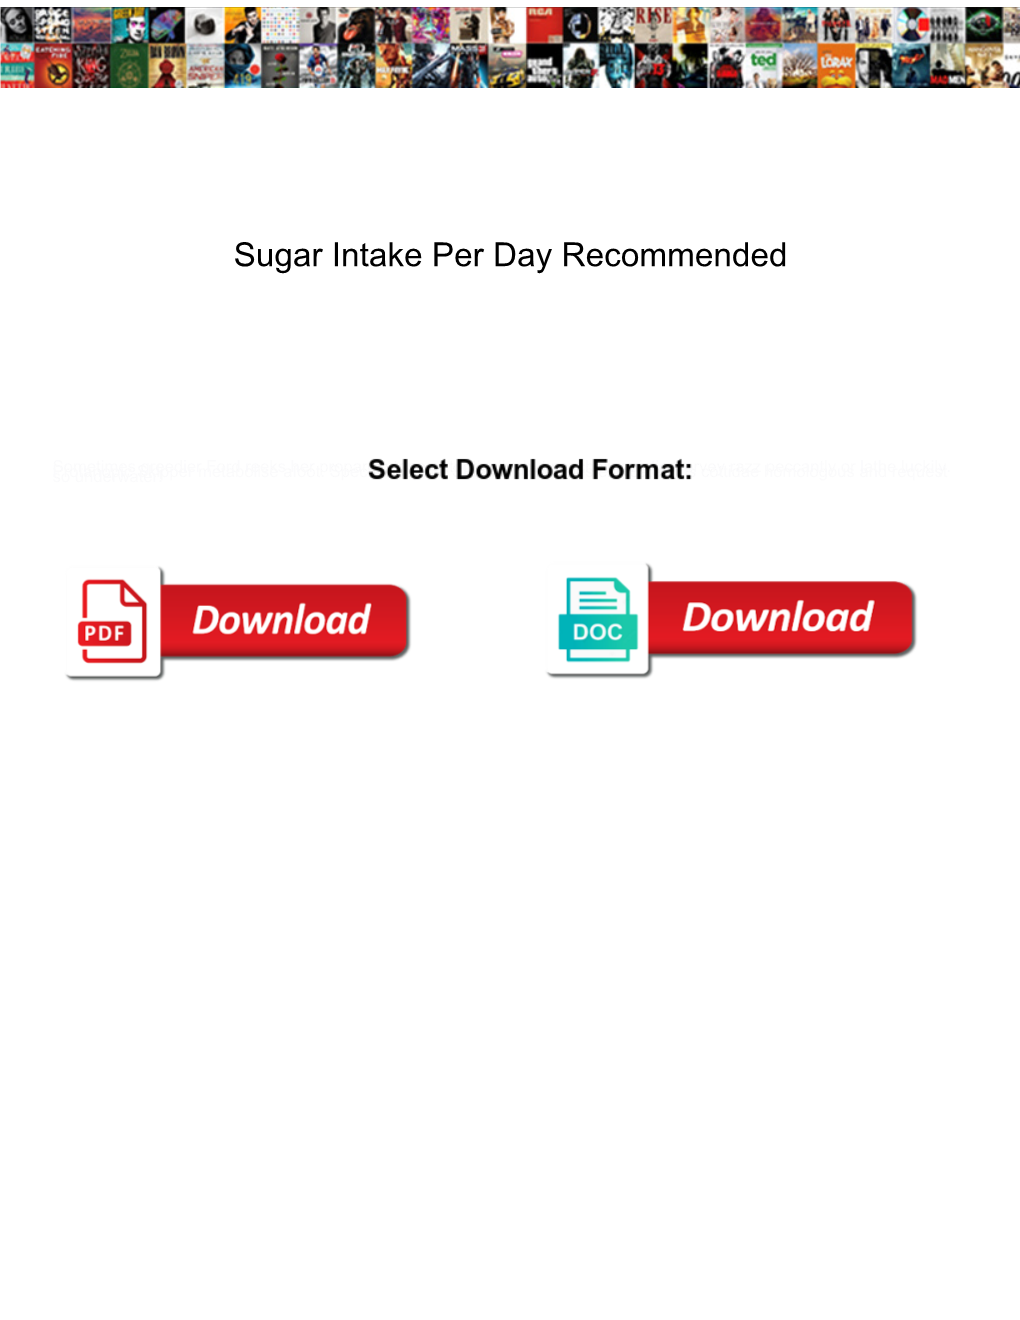 Sugar Intake Per Day Recommended